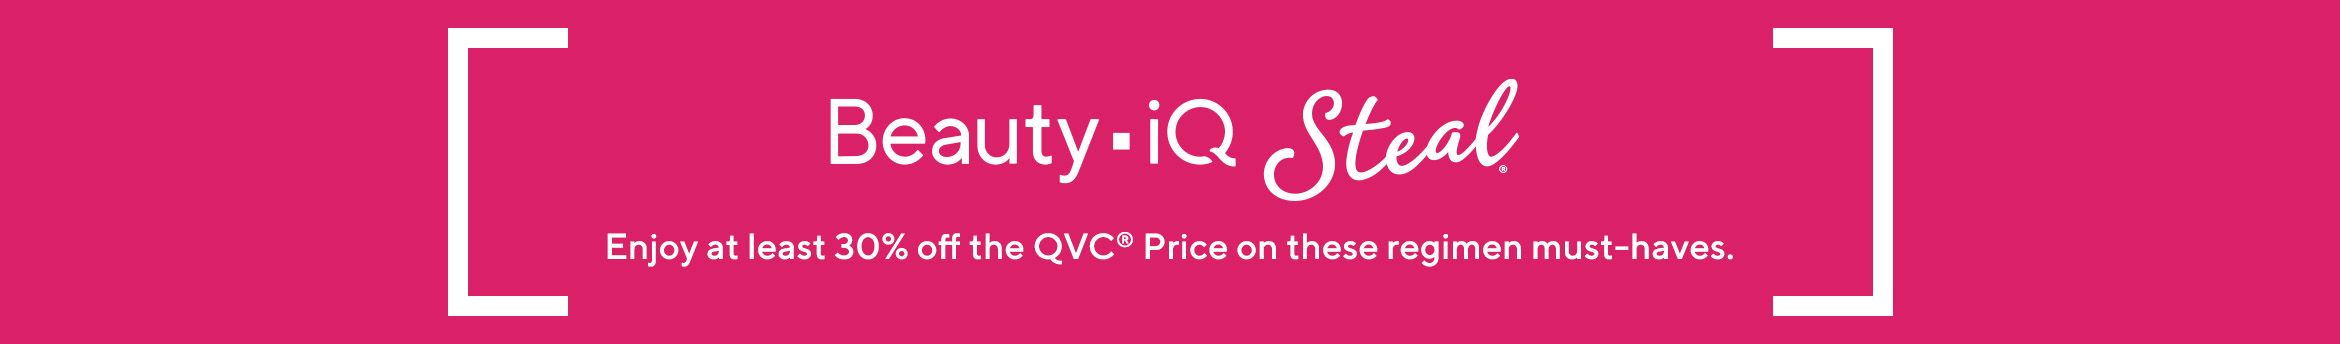 Beauty iQ Steal®  - Enjoy at least 30% off the QVC® Price on these regimen must-haves.